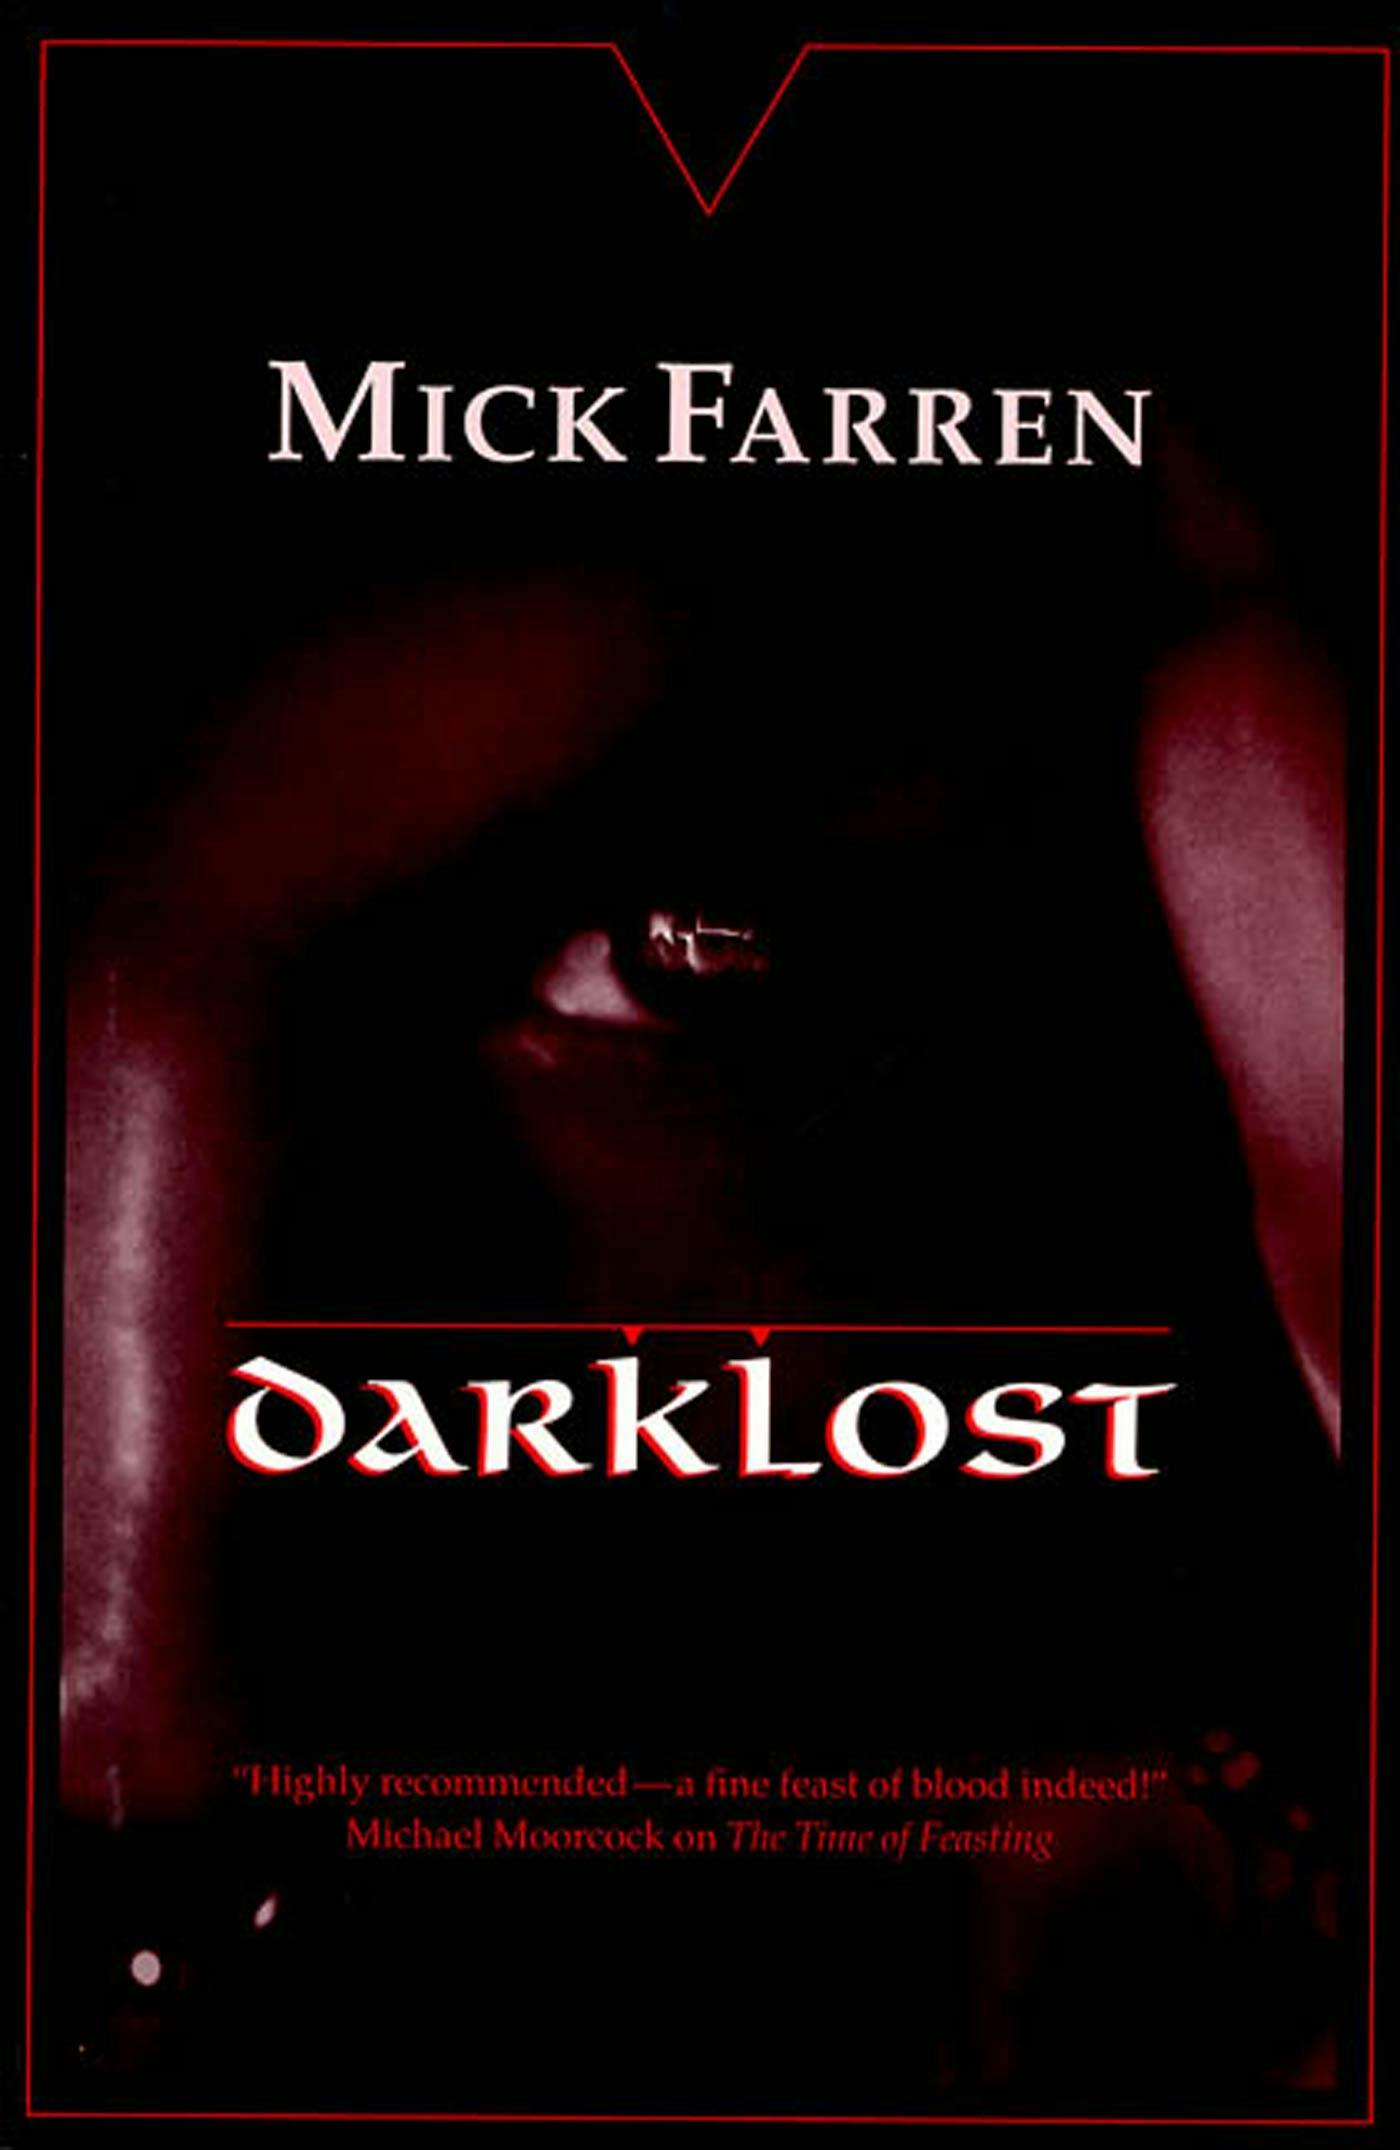 Cover for the book titled as: Darklost